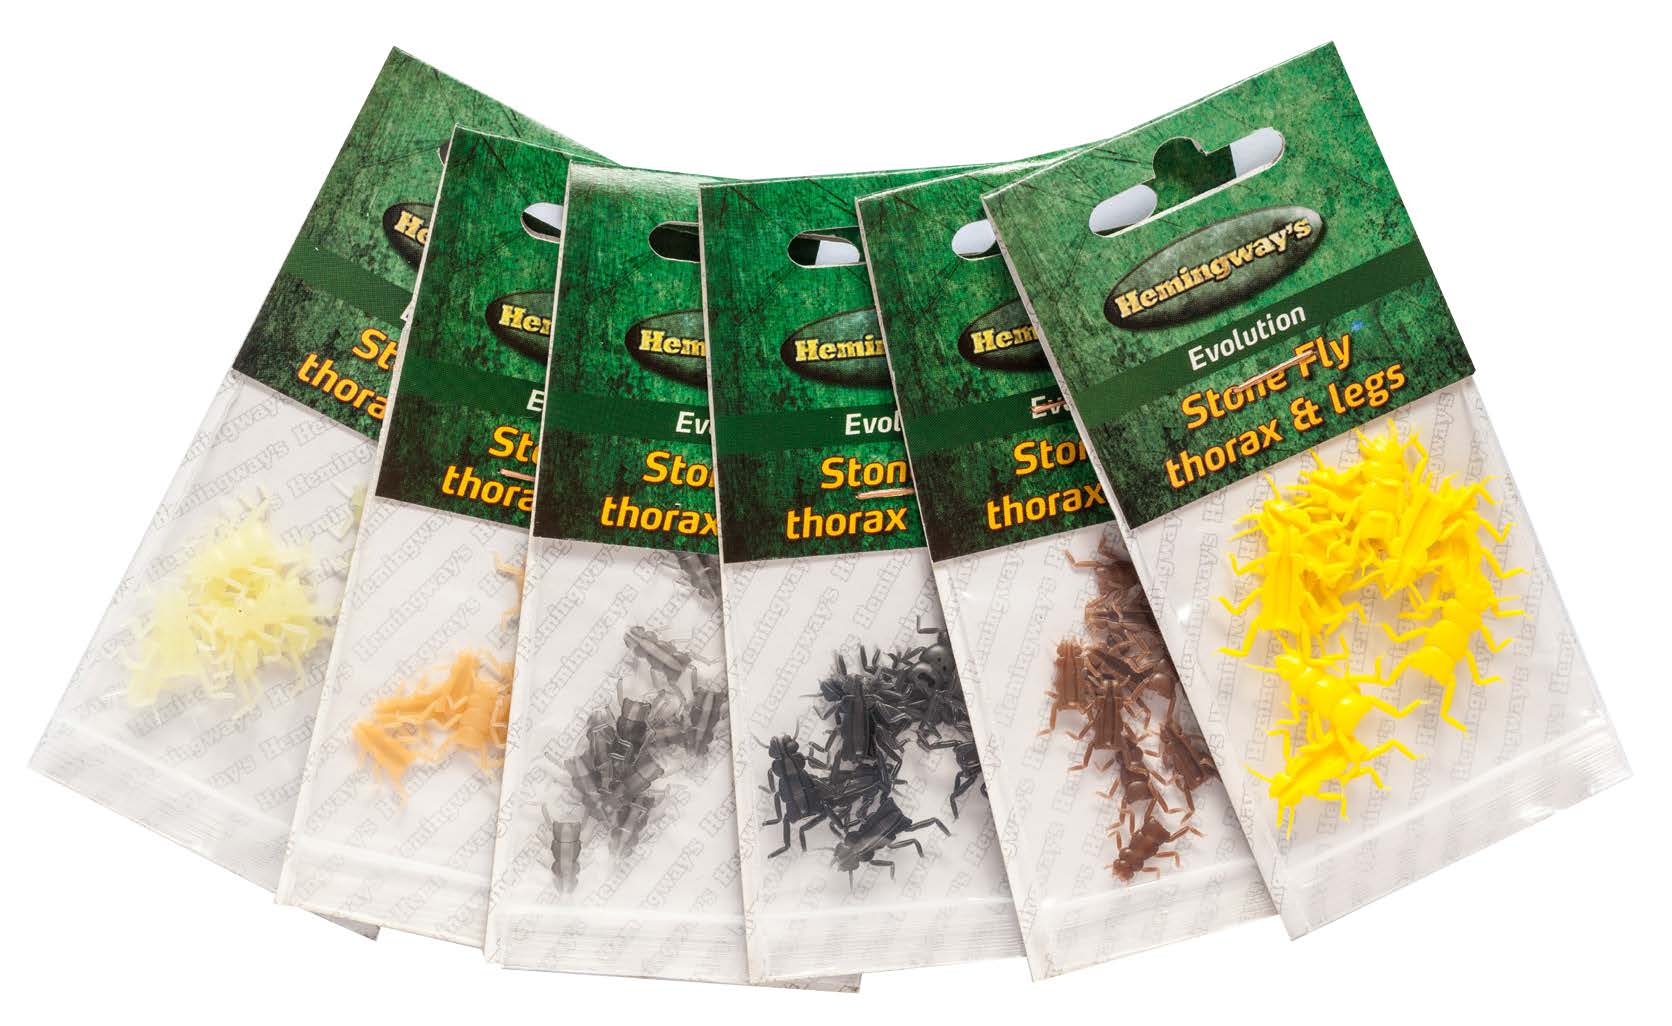 Hemingway's Evolution Stone Fly Thorax & Legs Extra Large Clear Yellow Fly Tying Materials